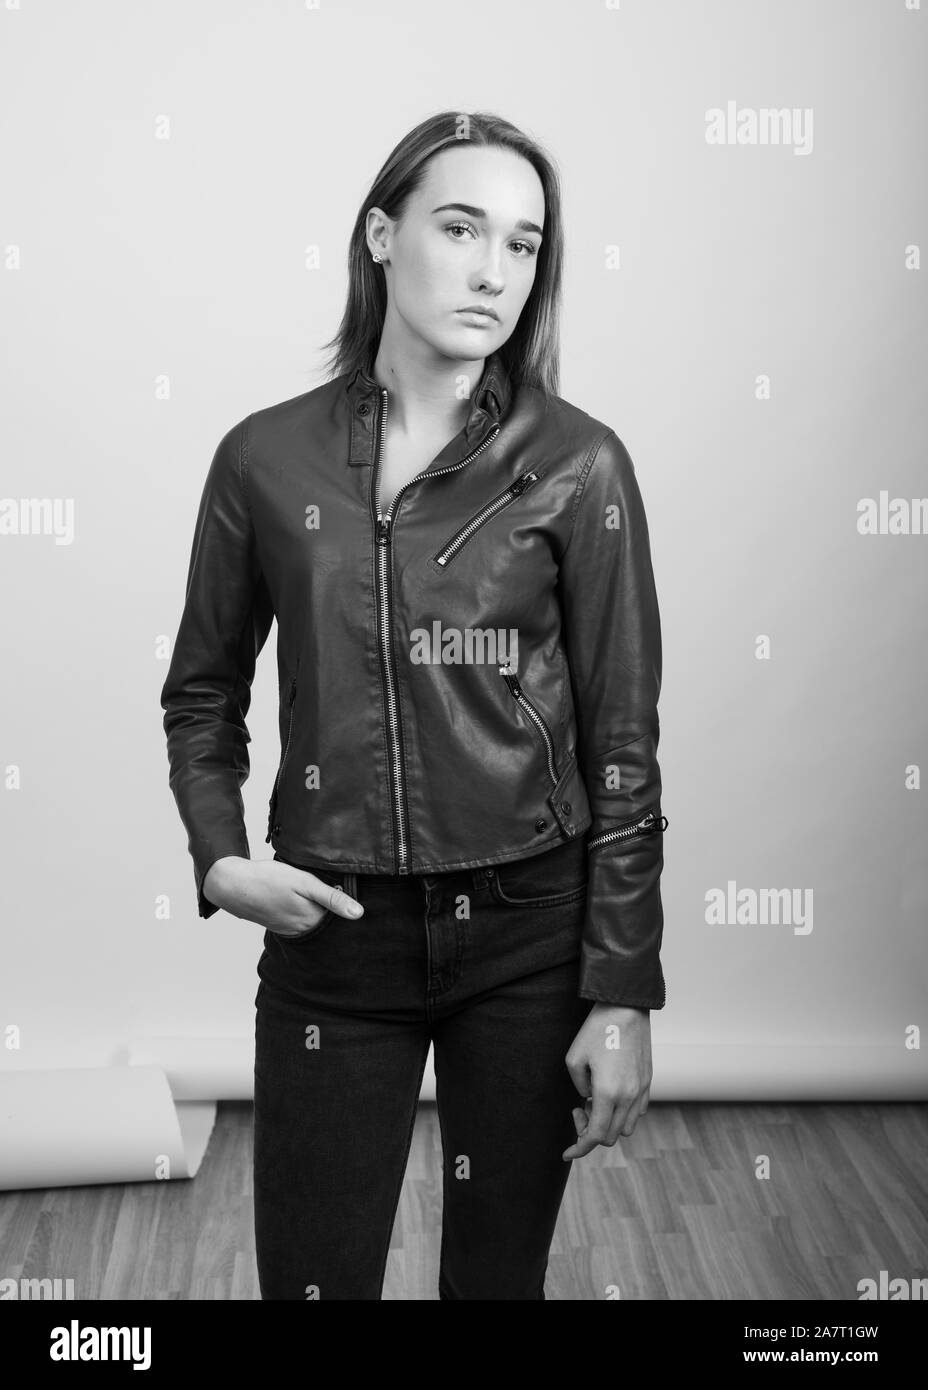 Black and white portrait of a young woman wearing a leather jacket Stock Photo